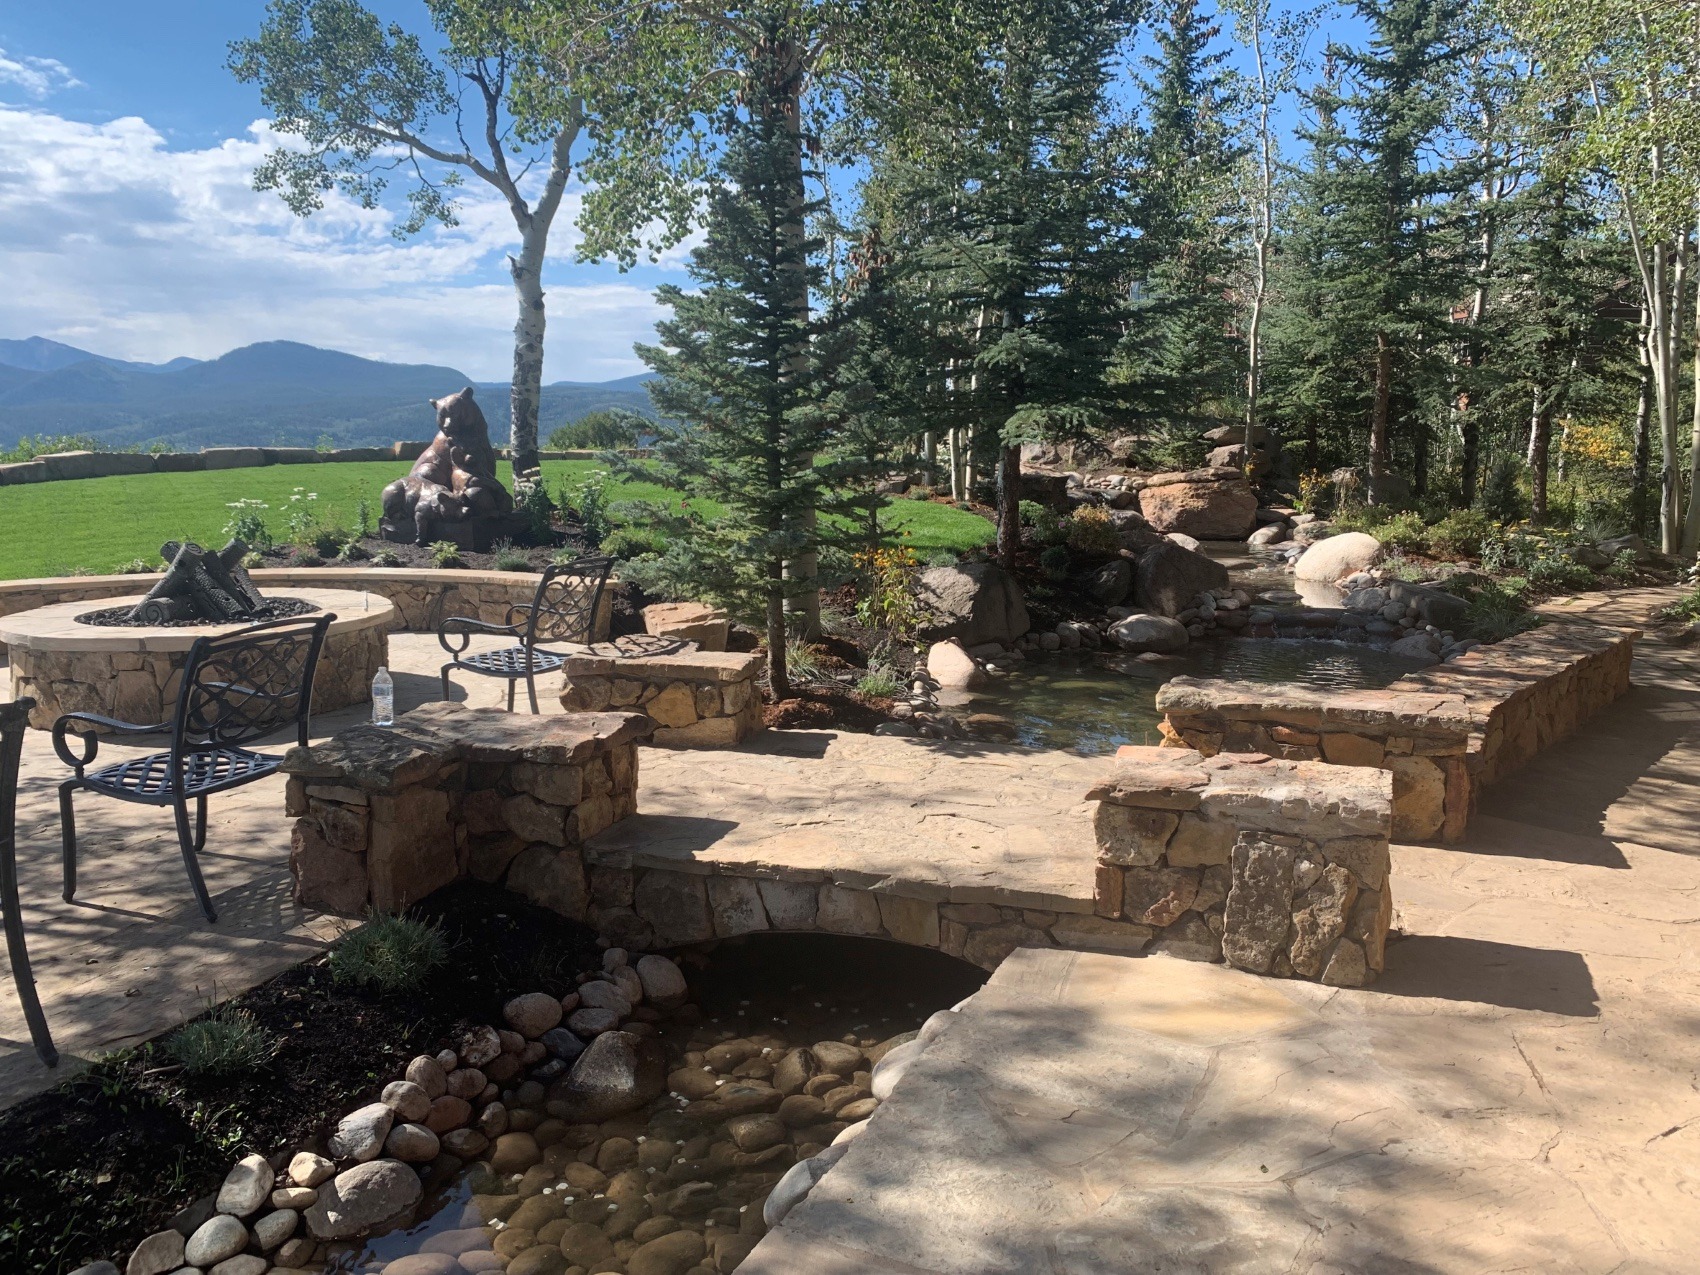 An outdoor landscaped area with stone structures, a water feature, fire pit, seating, and surrounding trees under a clear sky with distant mountains.